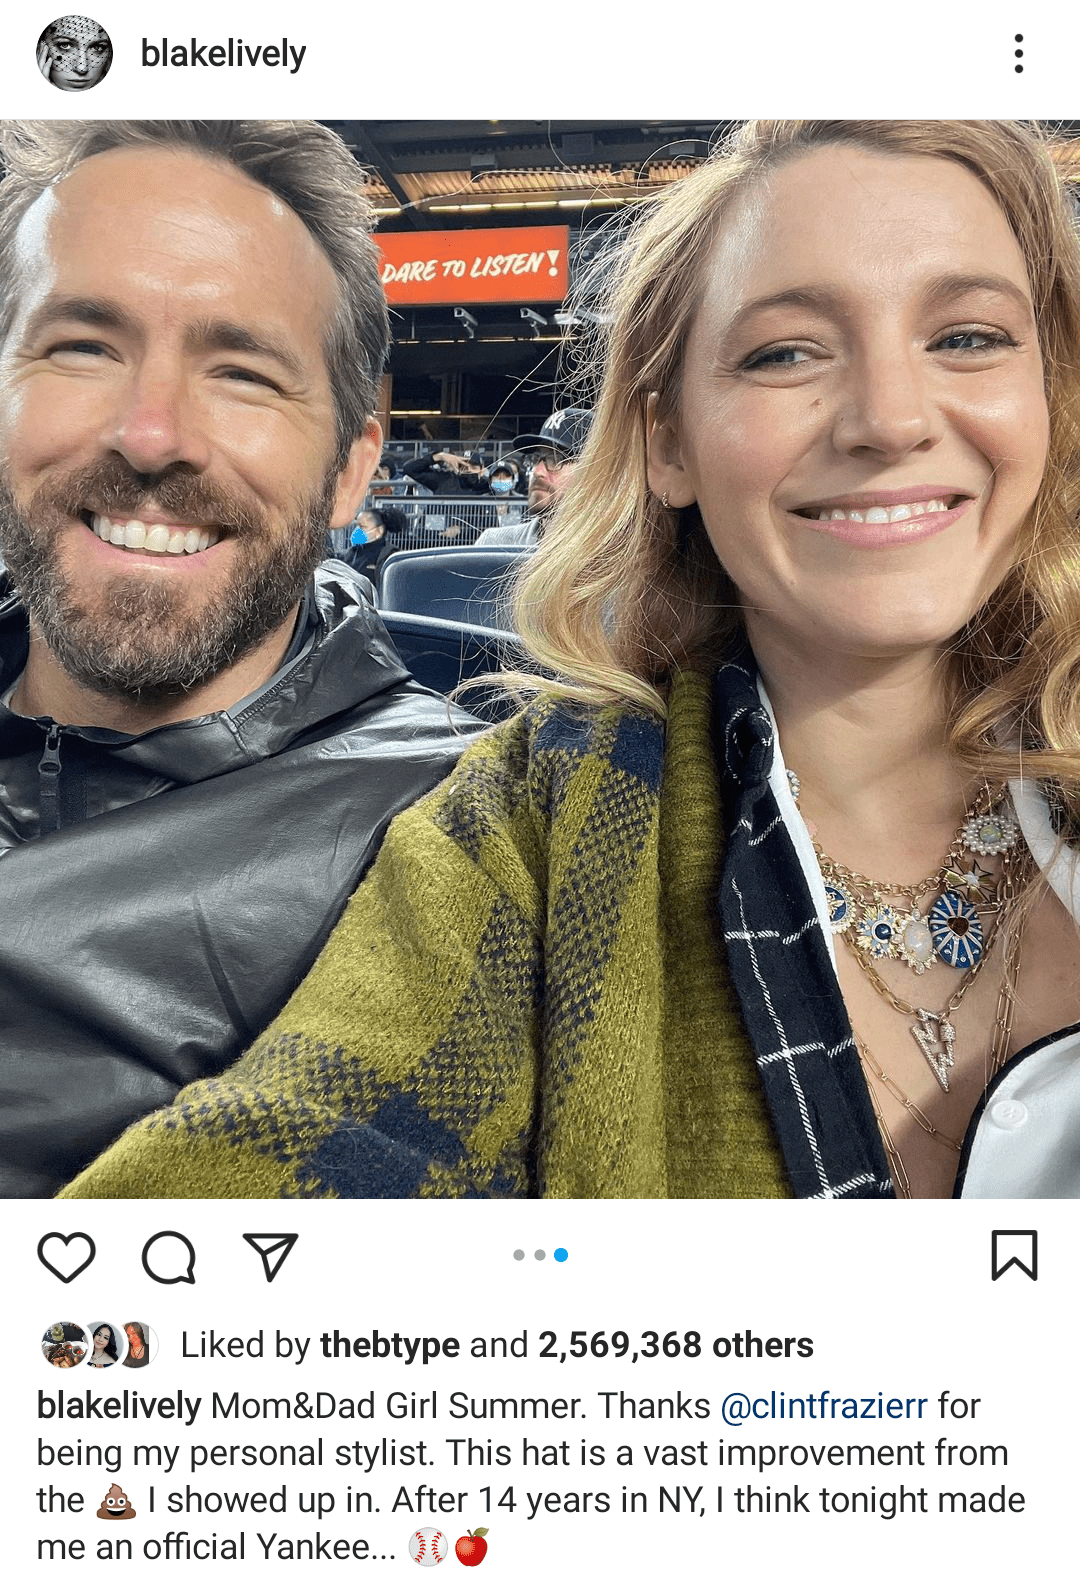 Ryan Reynolds and Blake Lively at a baseball game | Photo: Instagram/blakelively